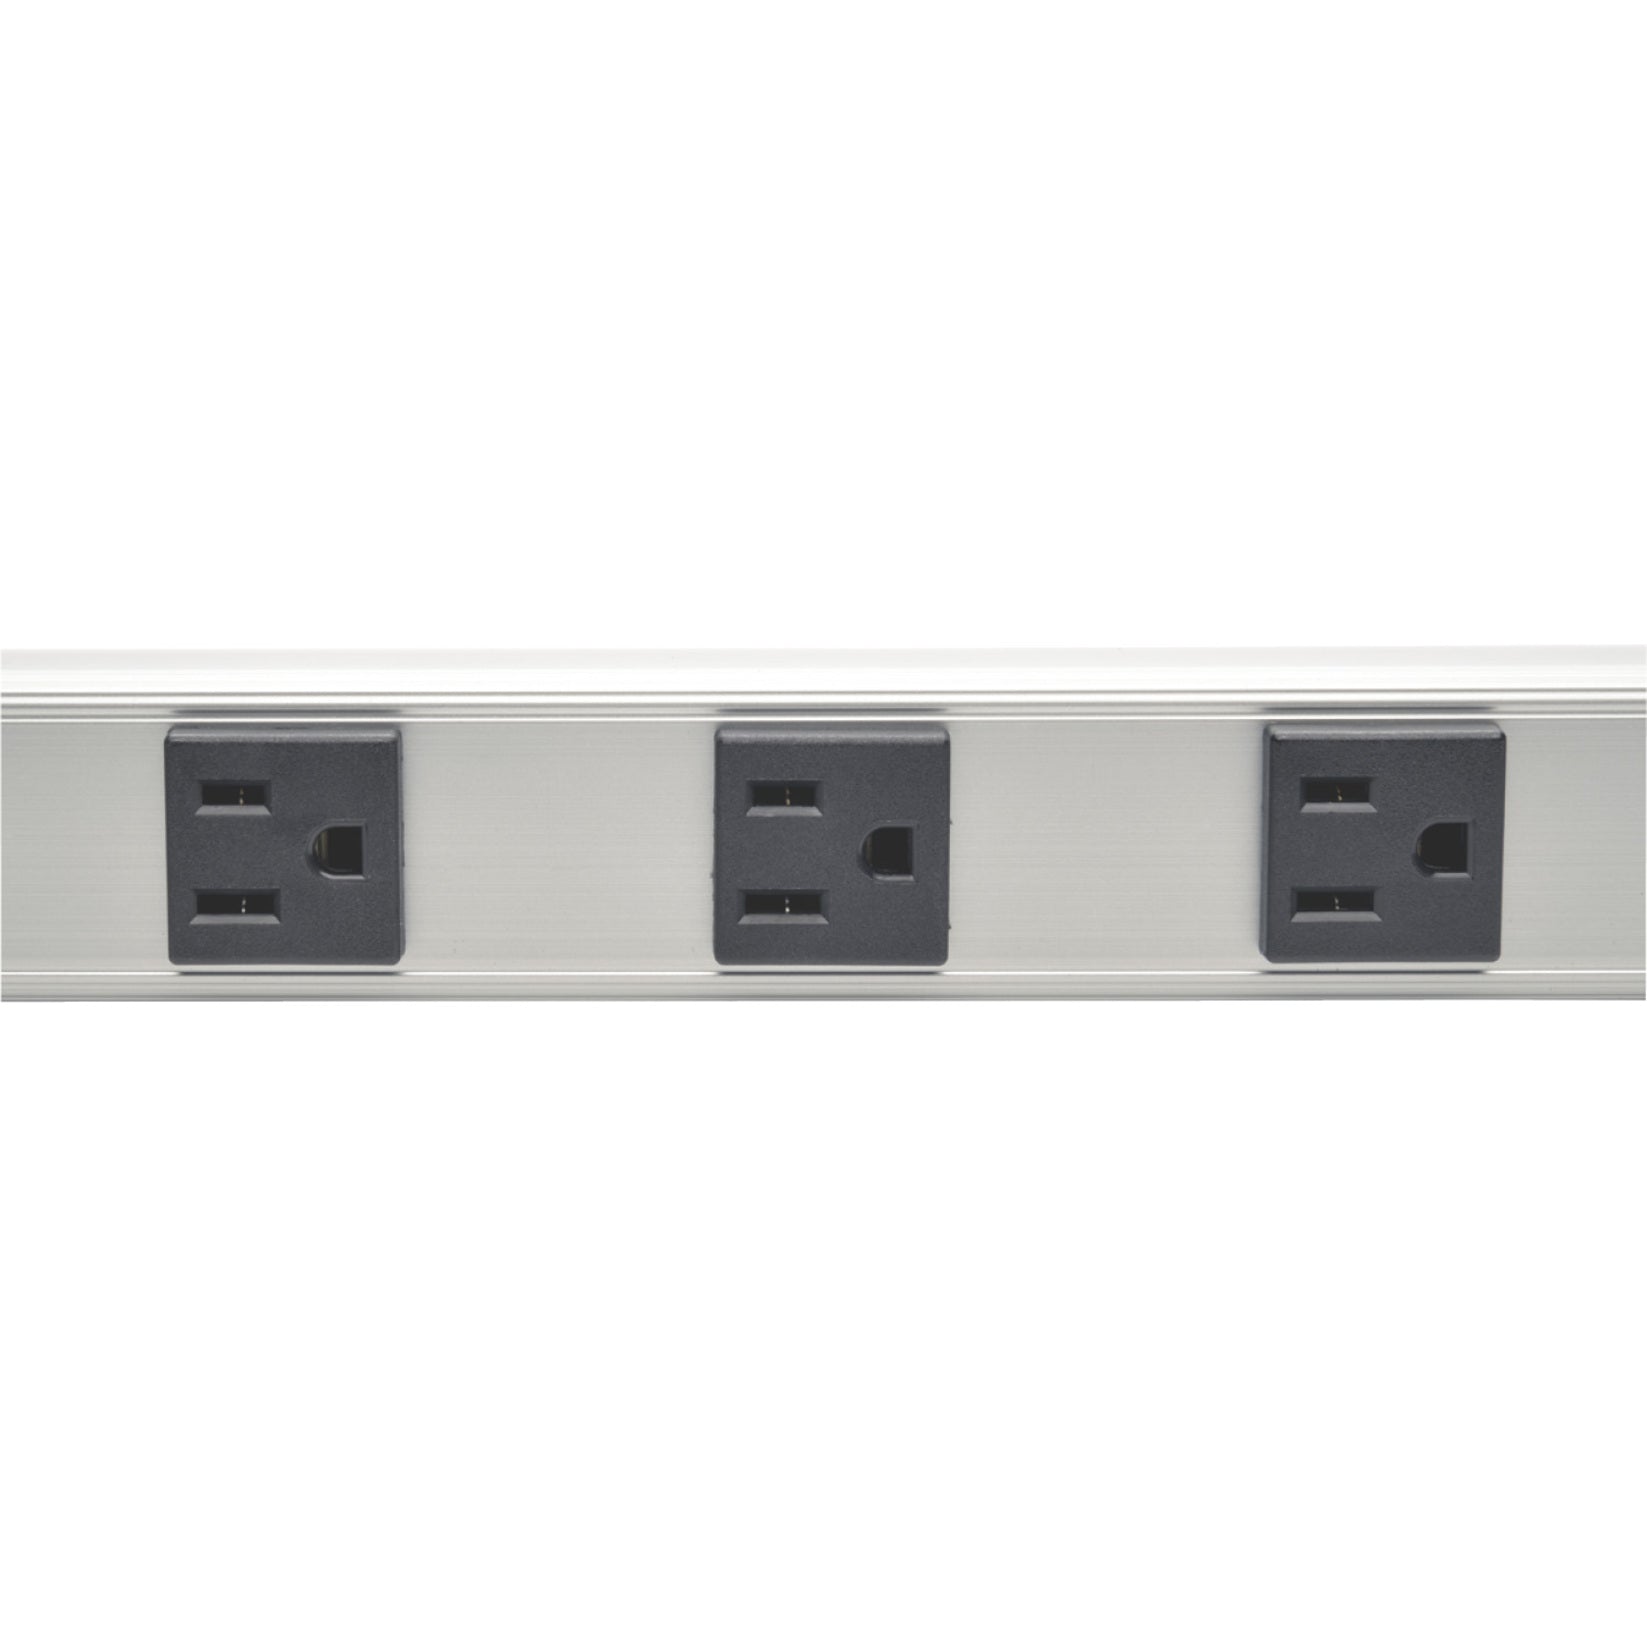 Tripp Lite SS3612 36-in. 12 Outlet Power Strip with Surge Suppression, 15-ft Cord, 1050 Joules